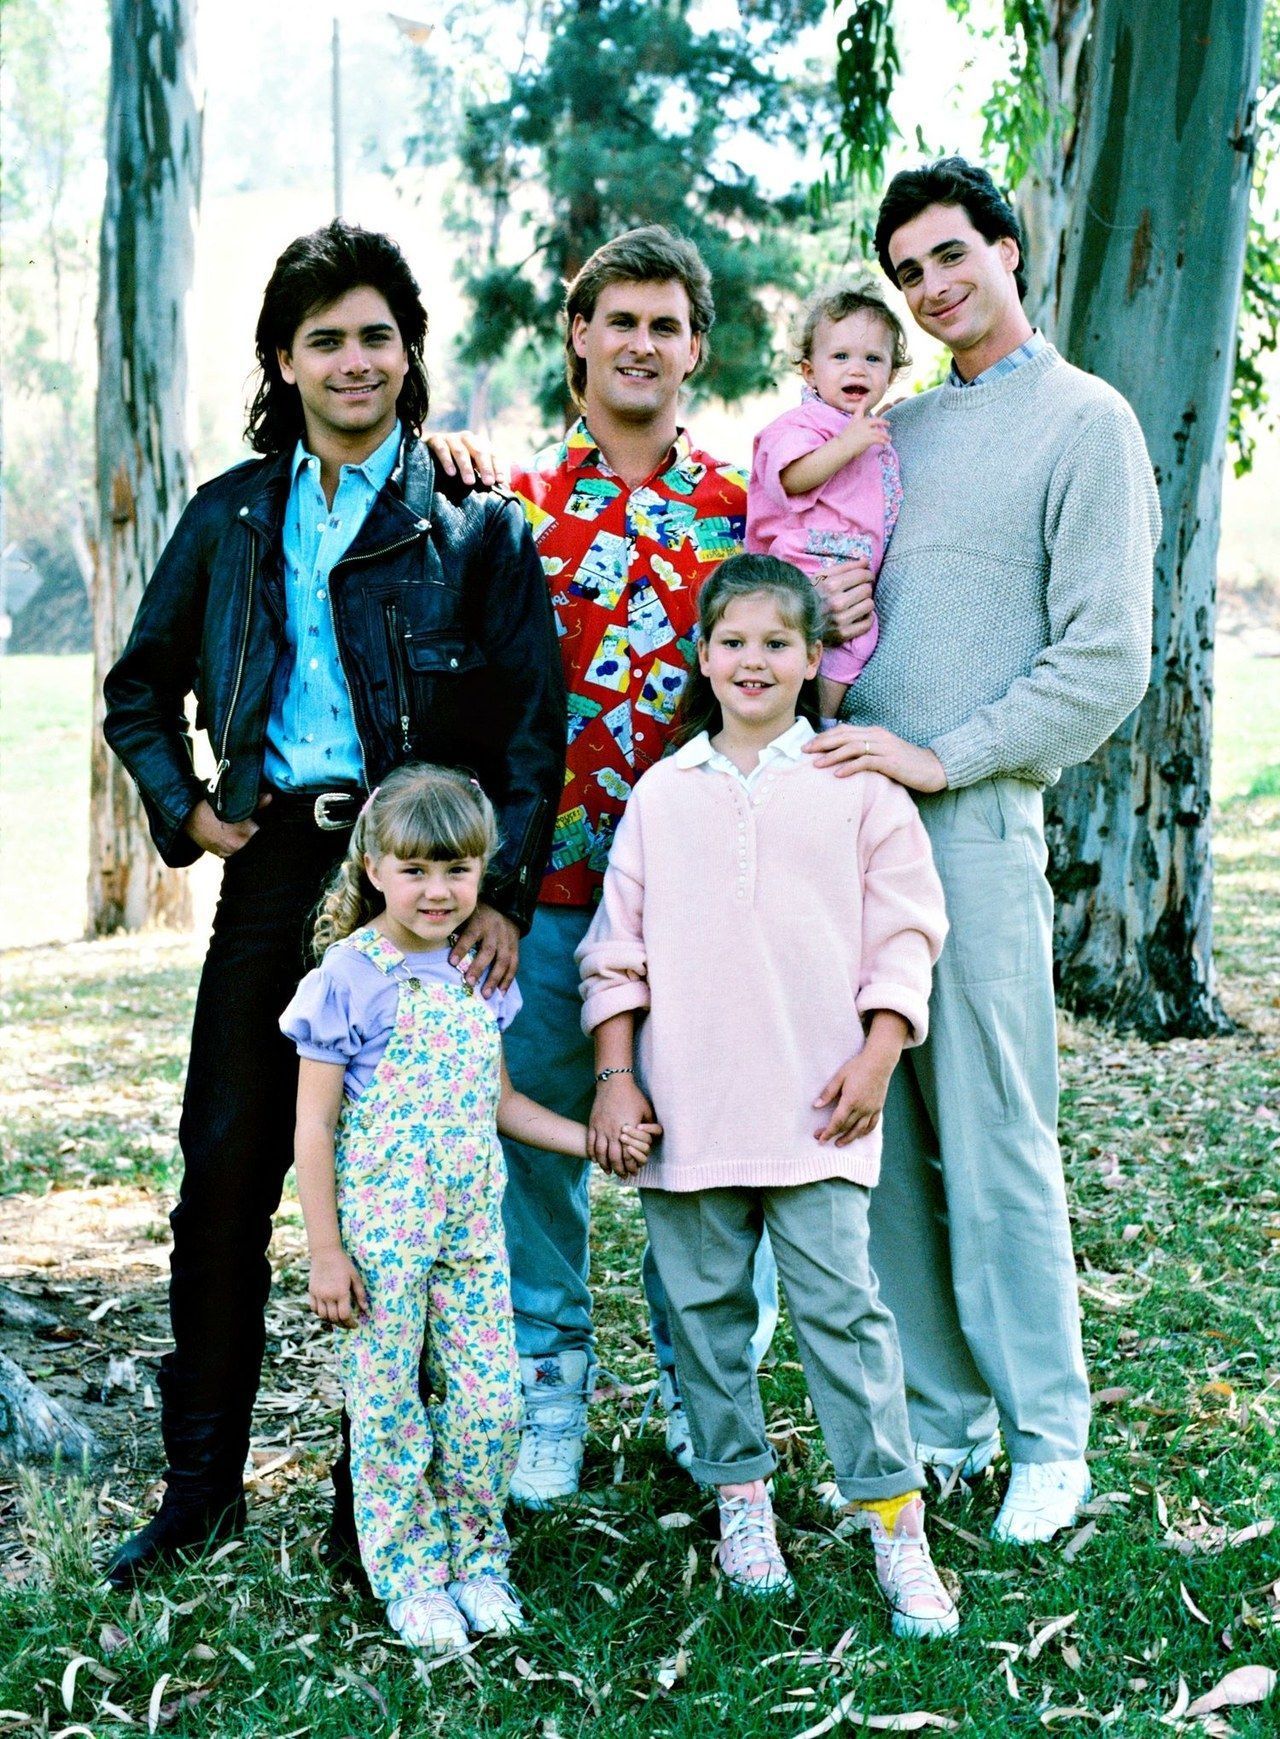 fuld house premiere 1987 bob saget john stamos dave coulier jodie sweetin candace cameron olsen twins